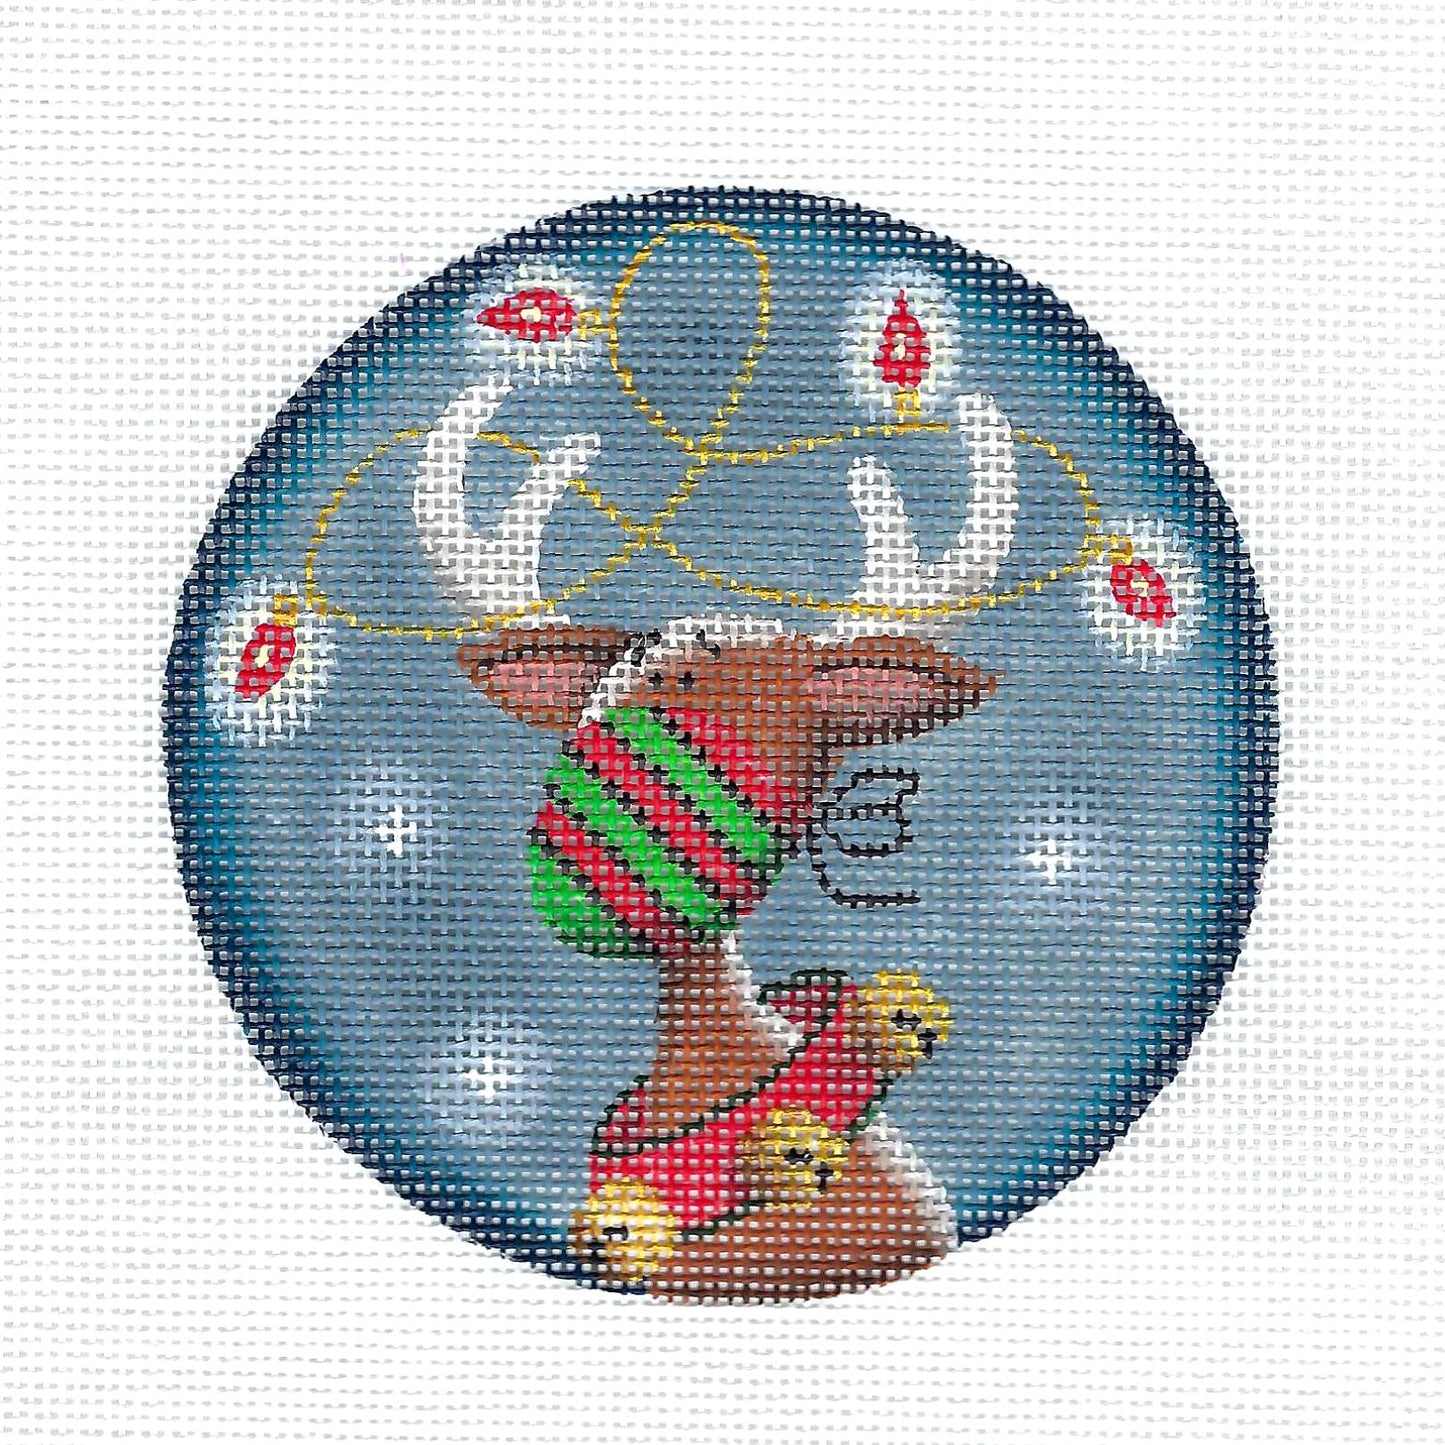 "MASK UP" ~ Christmas Reindeer and Lights COVID MASK Handpainted Needlepoint Canvas by Rebecca Wood